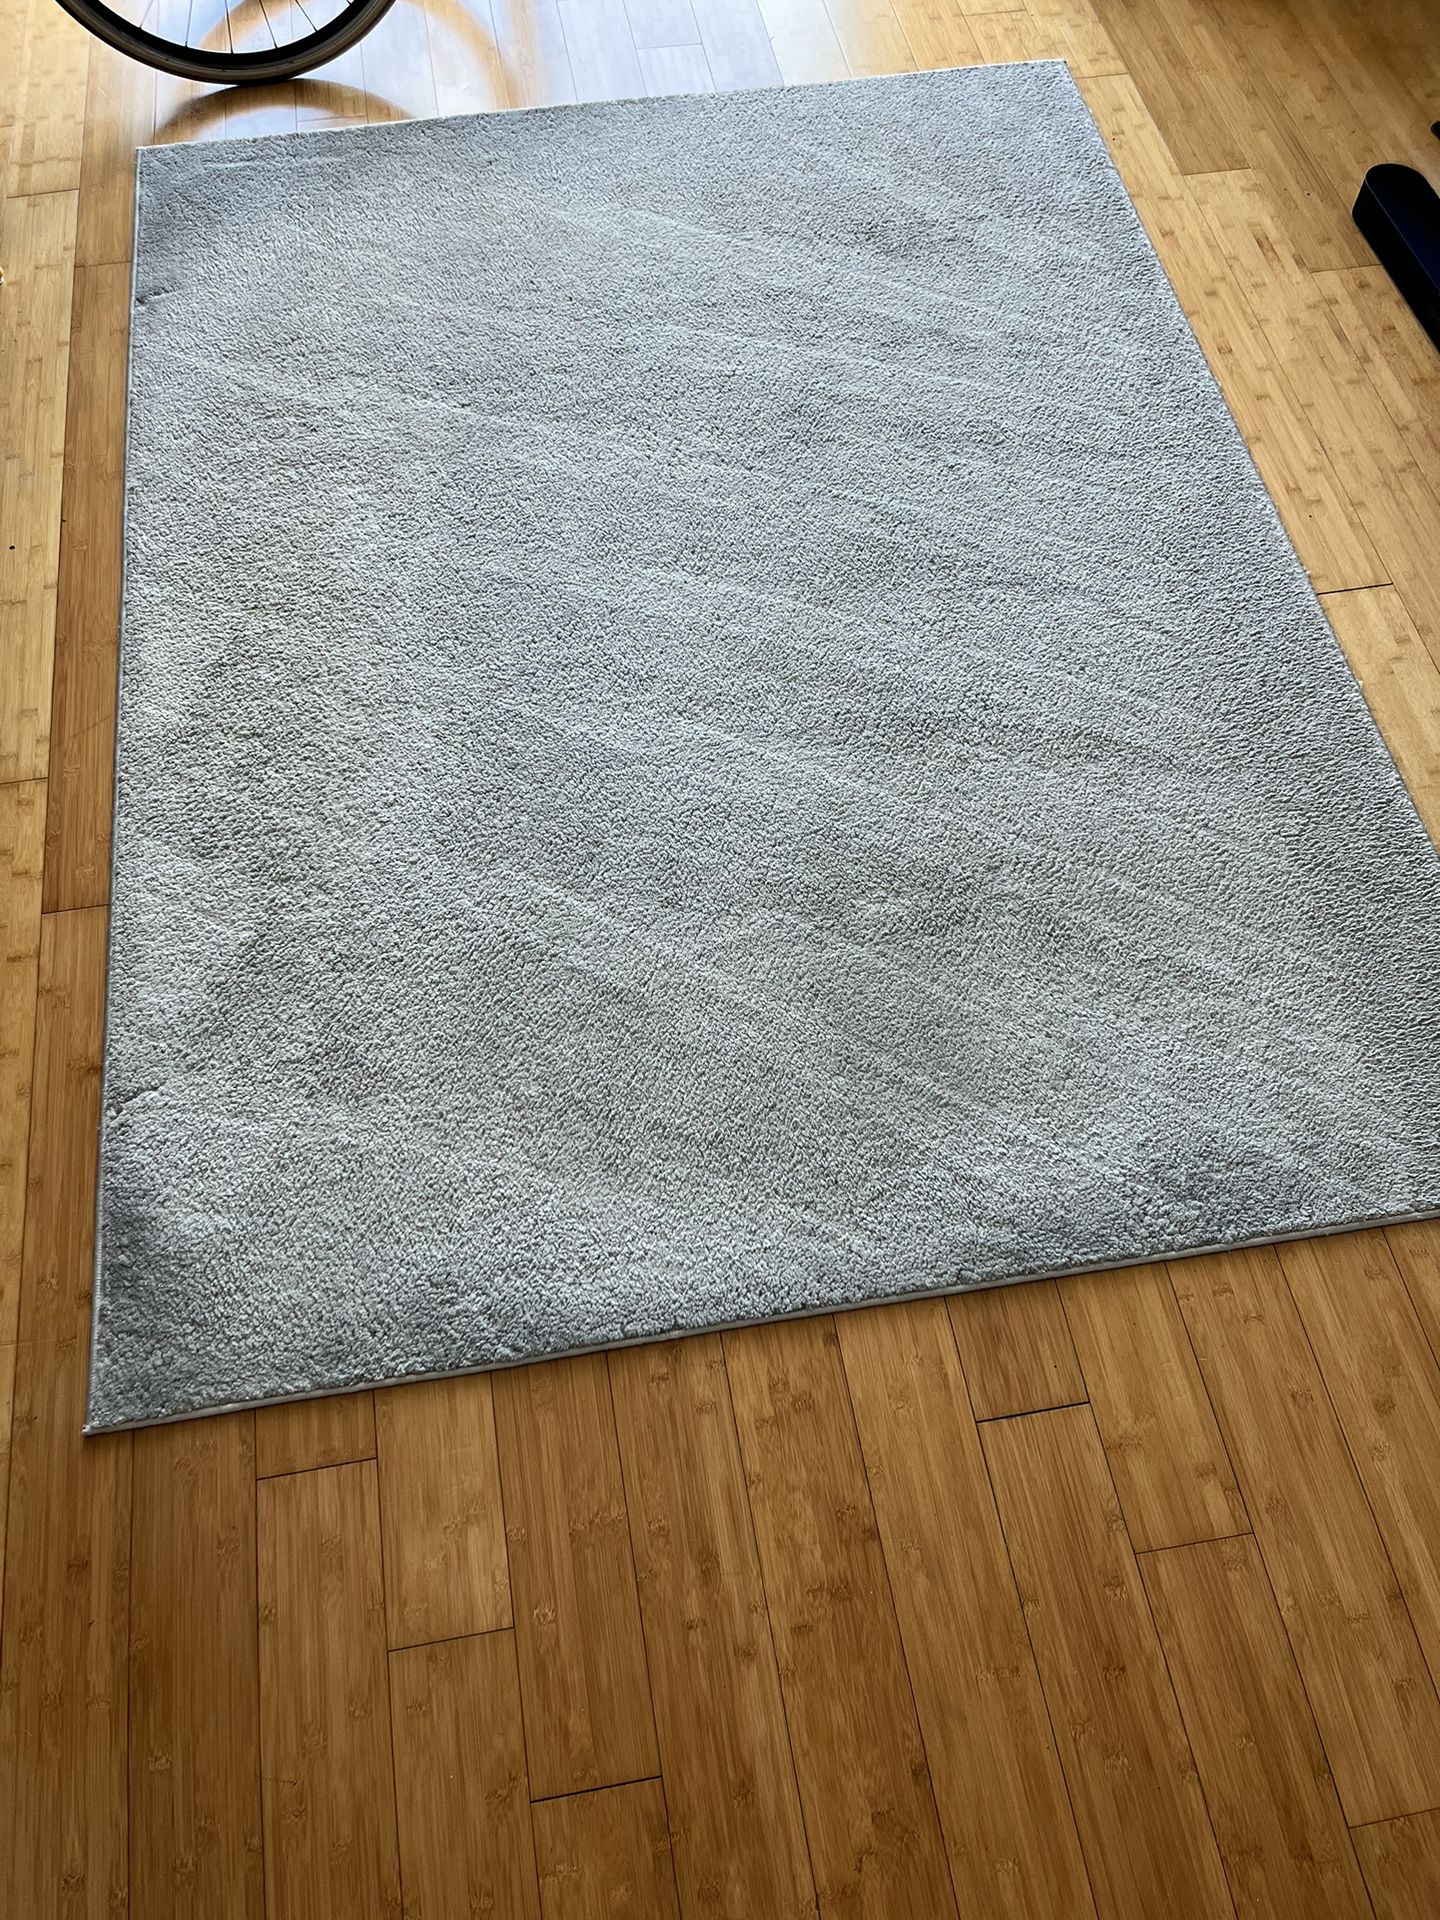 Saten Rug Gray Size: 5'2"X7' - 160x213 cm - Moving Need Gone Asap 